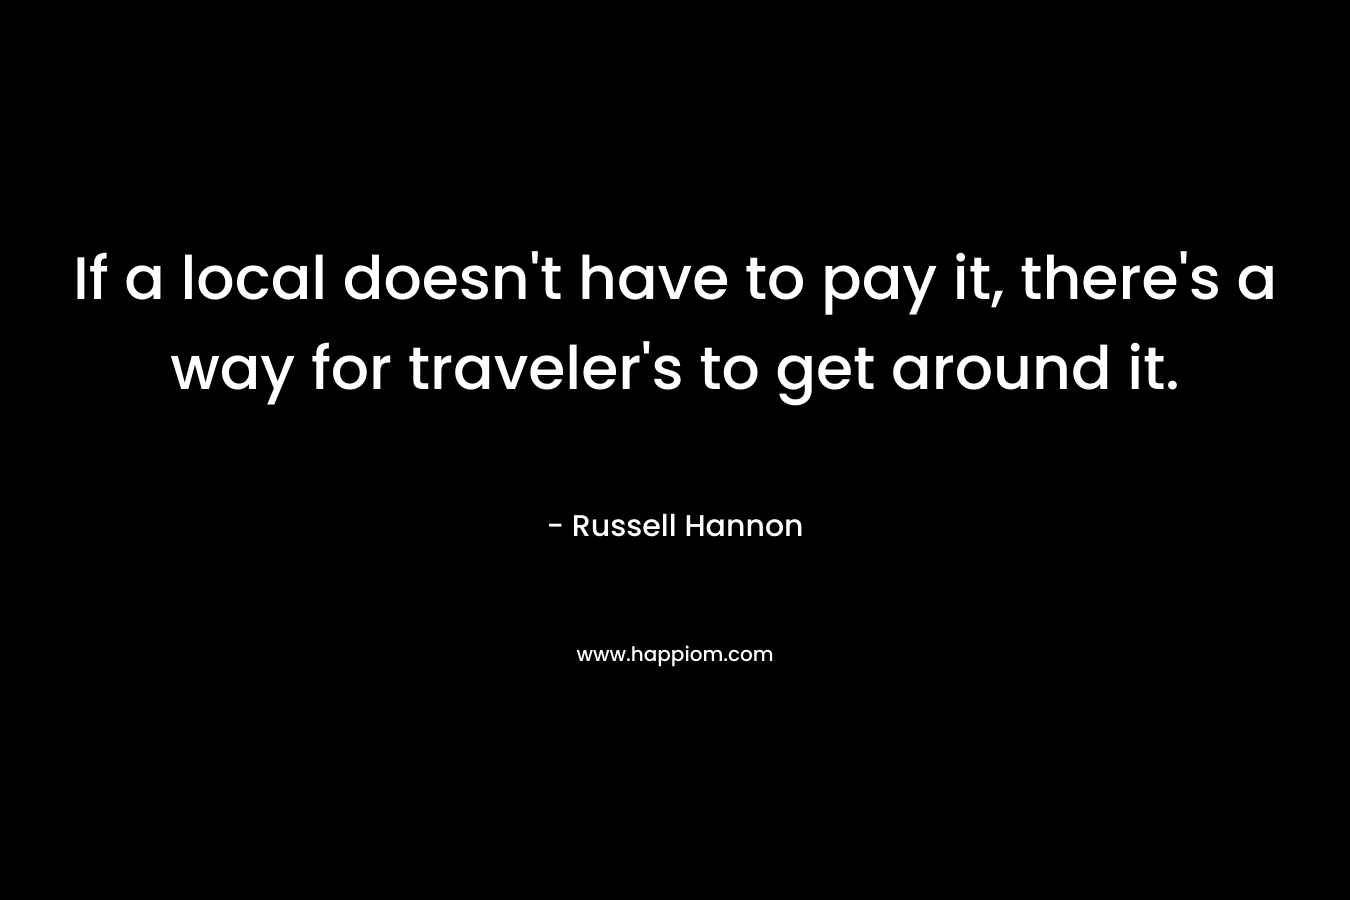 If a local doesn't have to pay it, there's a way for traveler's to get around it.